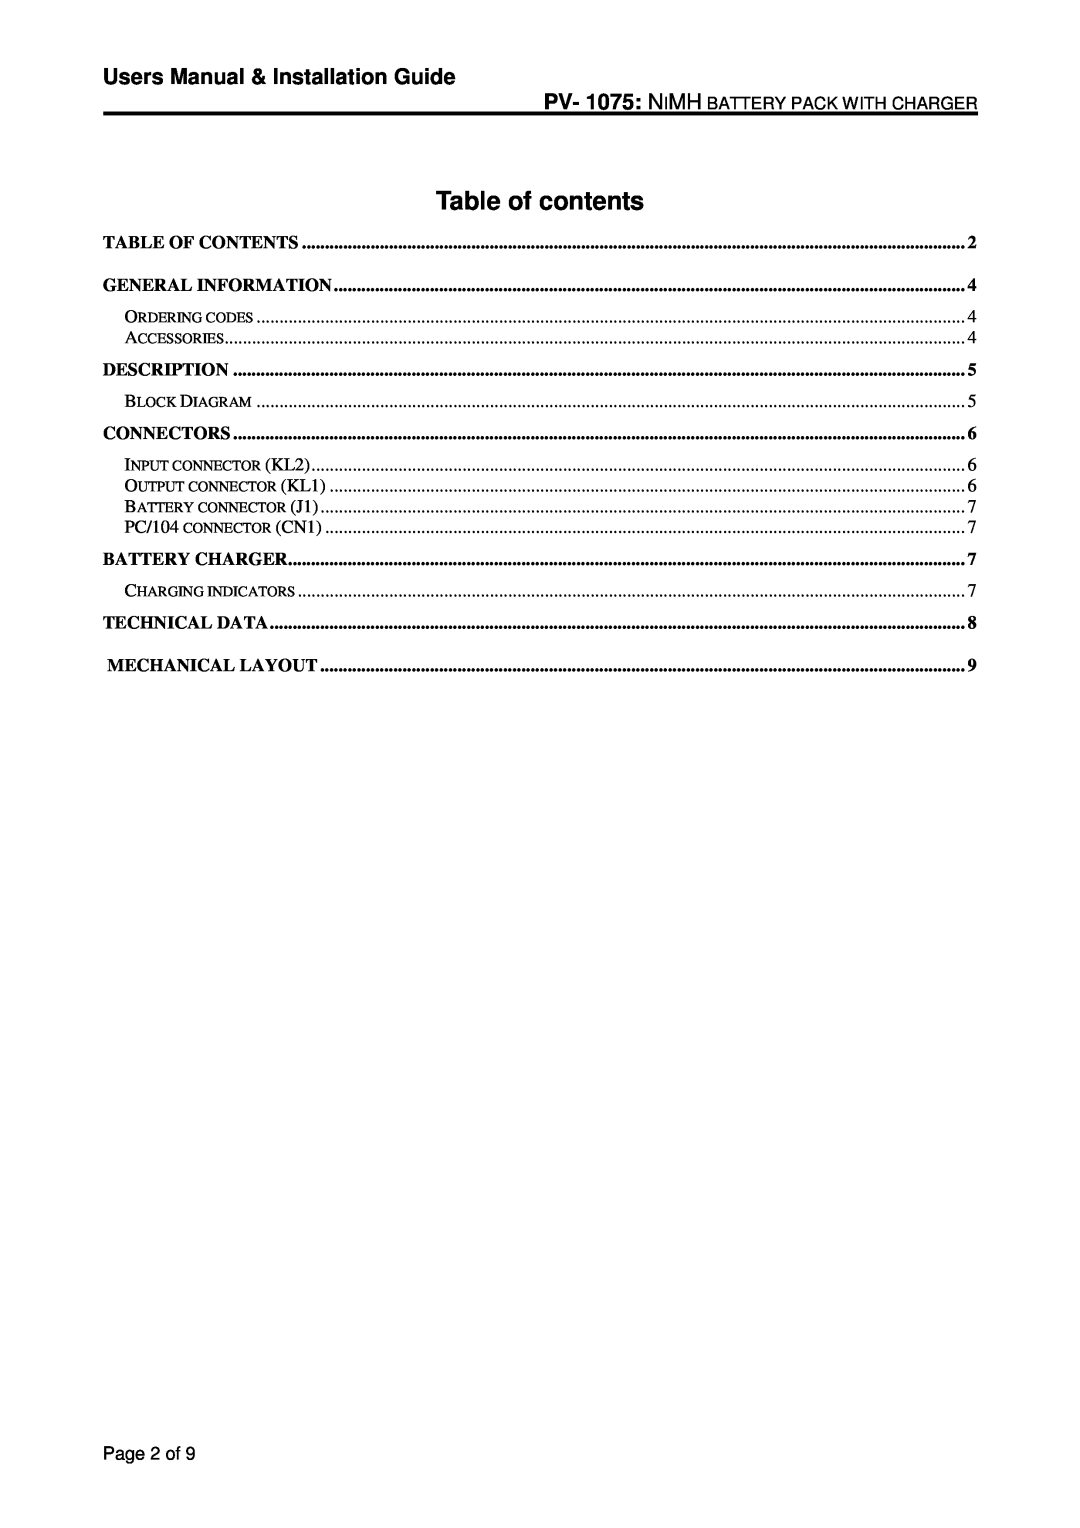 Micro Technic PV-1075-CAR Users Manual & Installation Guide, Table of contents, Table Of Contents, General Information 